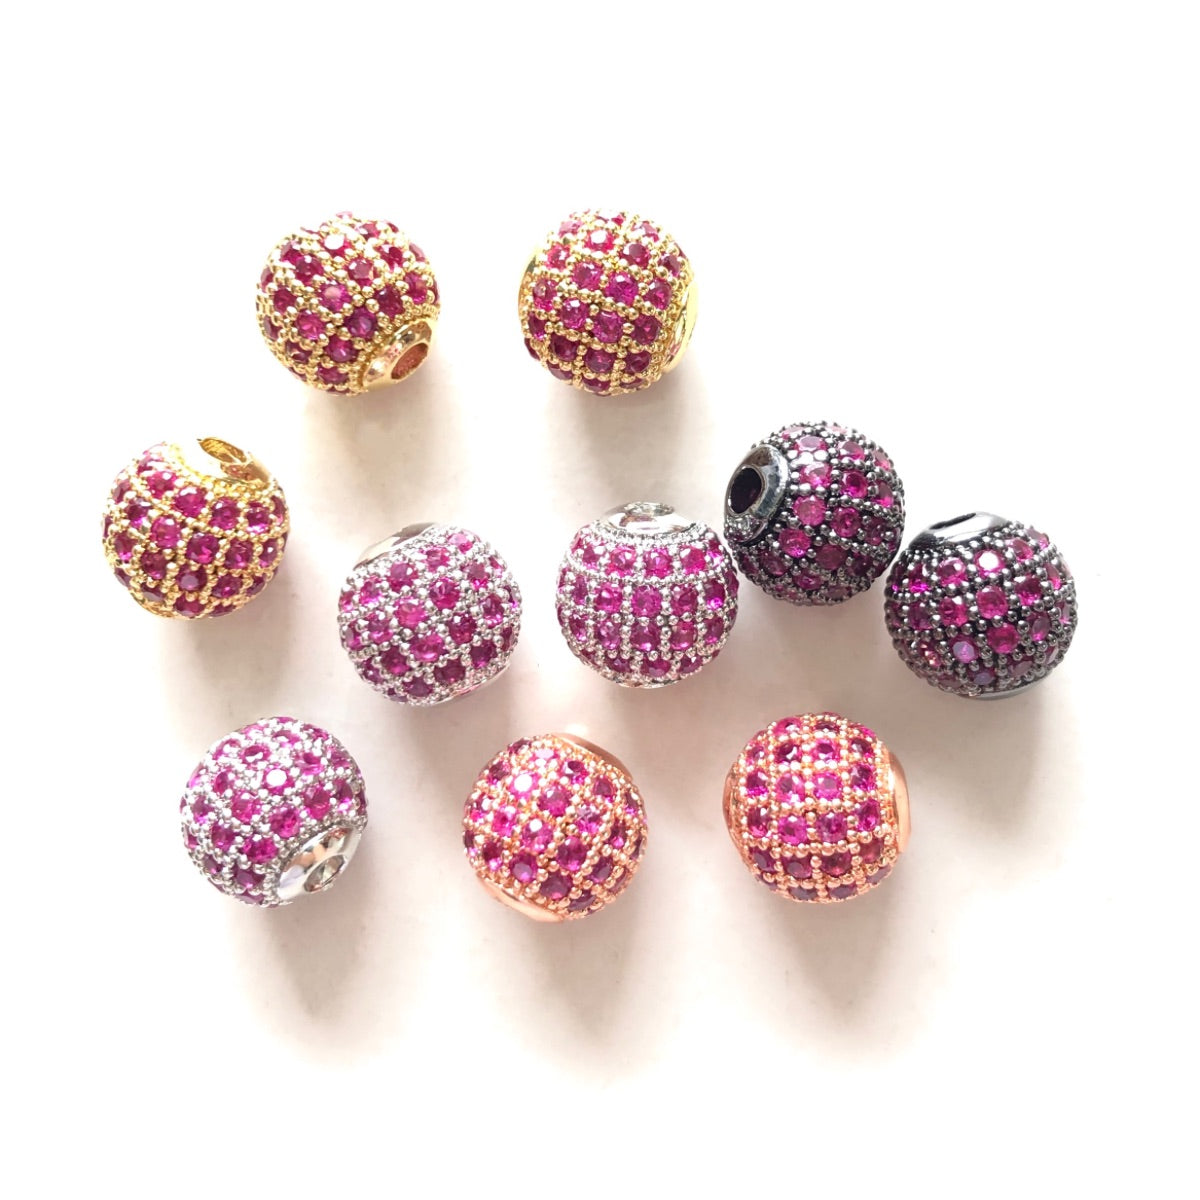 10pcs/lot 6mm, 8mm Colorful CZ Paved Ball Spacers Mix Colors Fuchsia CZ Paved Spacers 6mm Beads 8mm Beads Ball Beads Colorful Zirconia New Spacers Arrivals Charms Beads Beyond